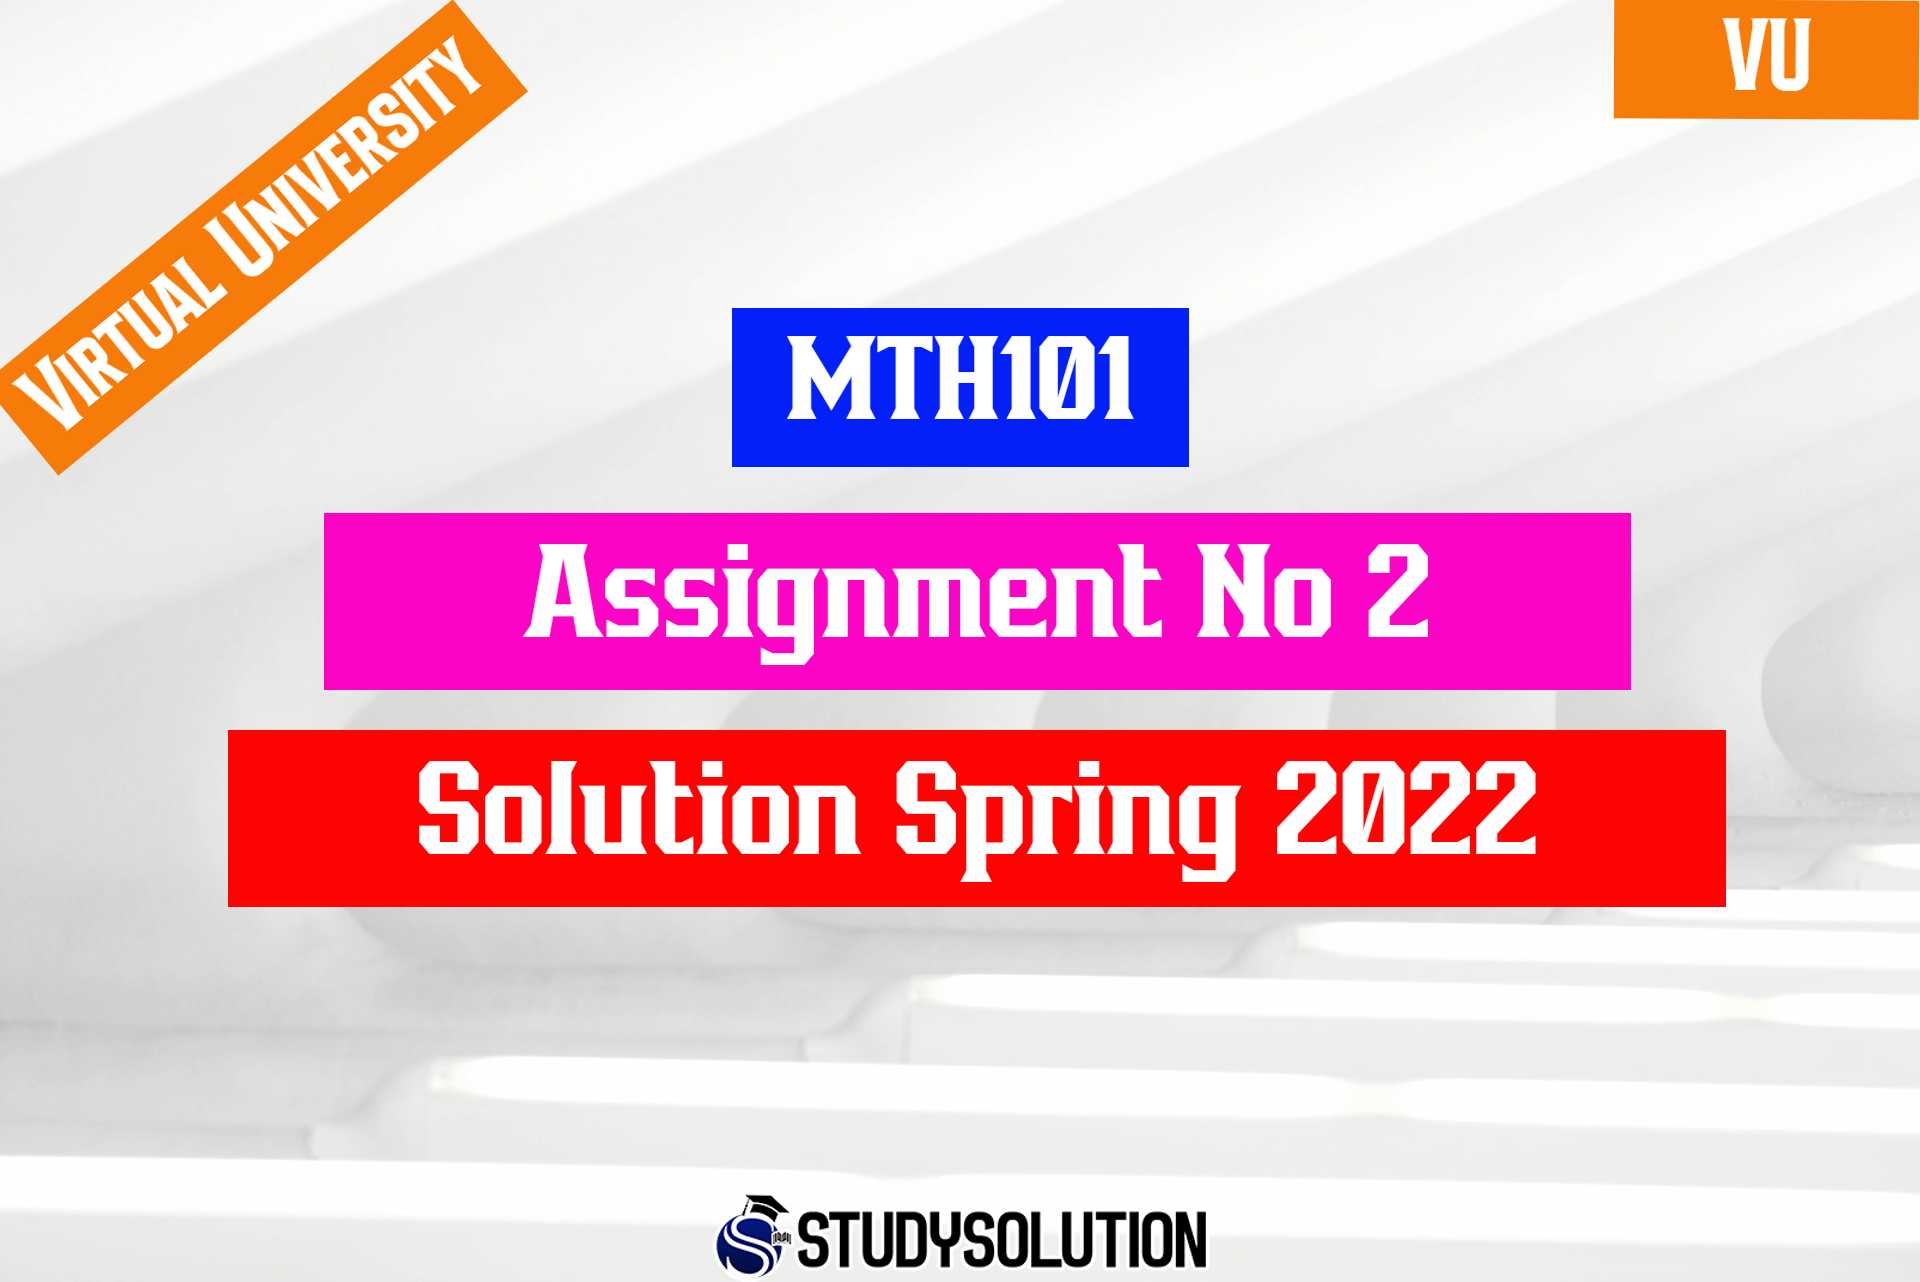 MTH101 Assignment No 2 Solution Spring 2022